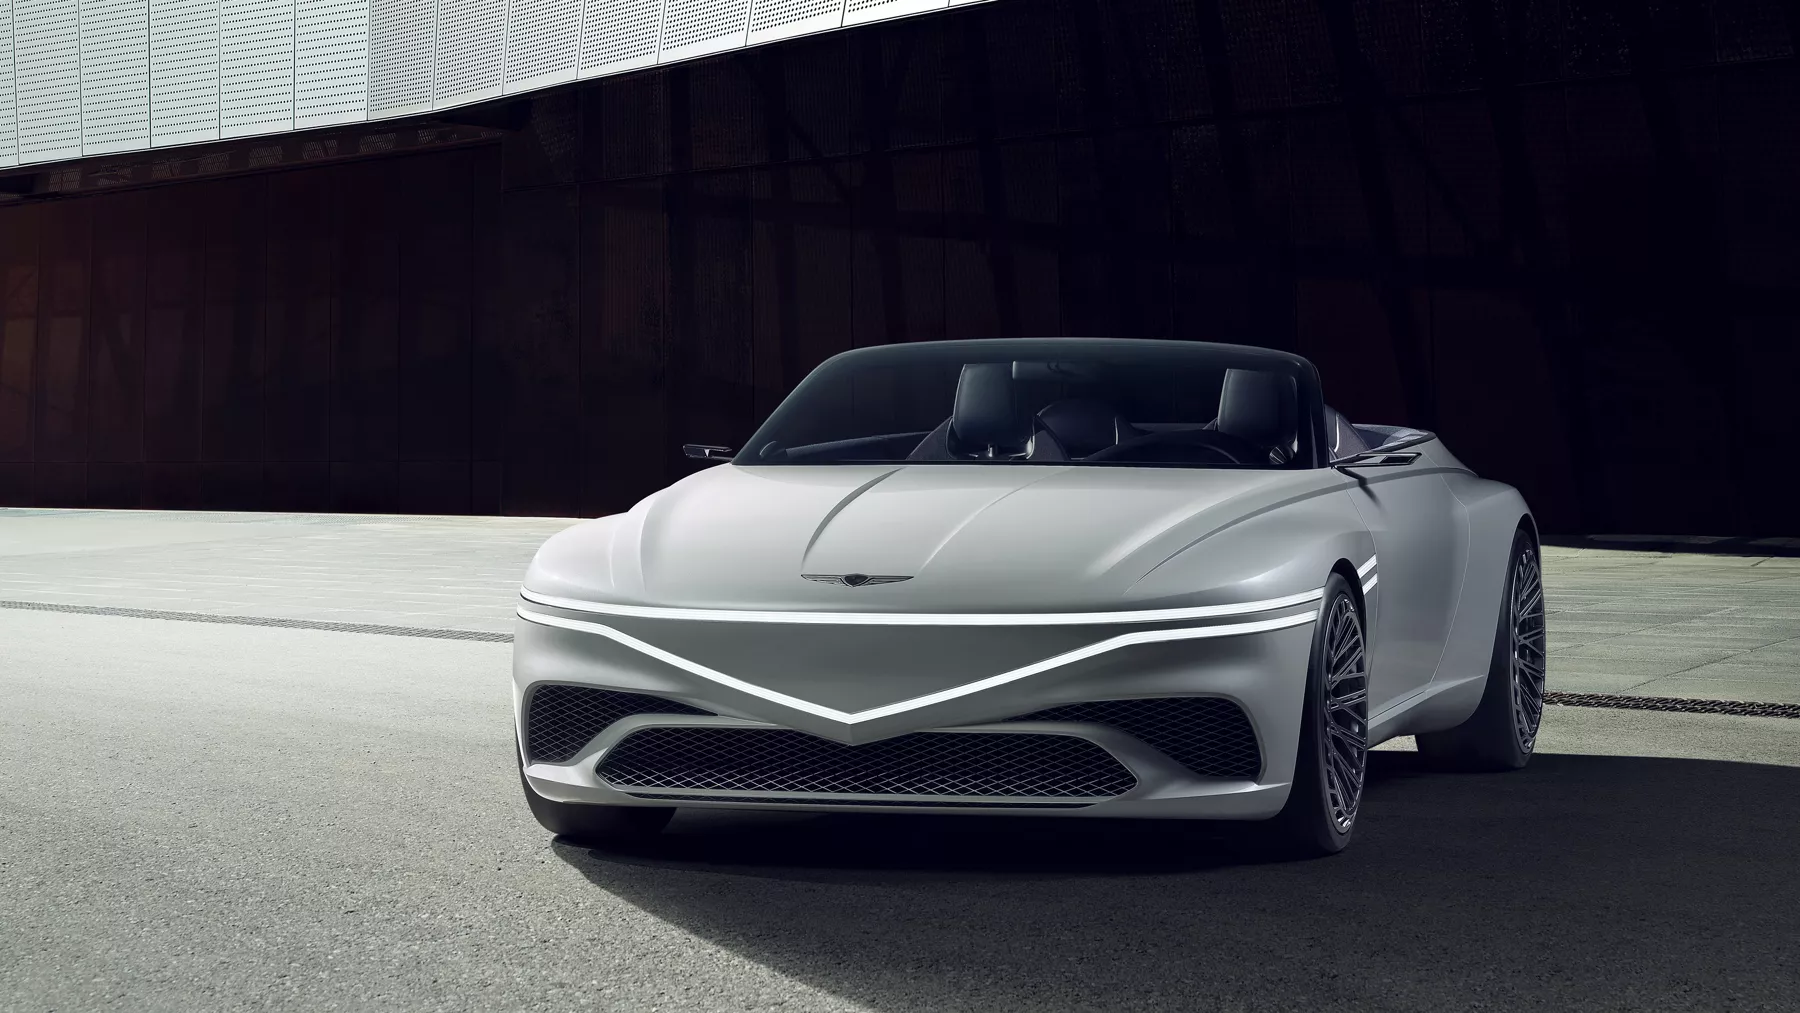 Front view of parked X Convertible Concept with headlights illuminated.